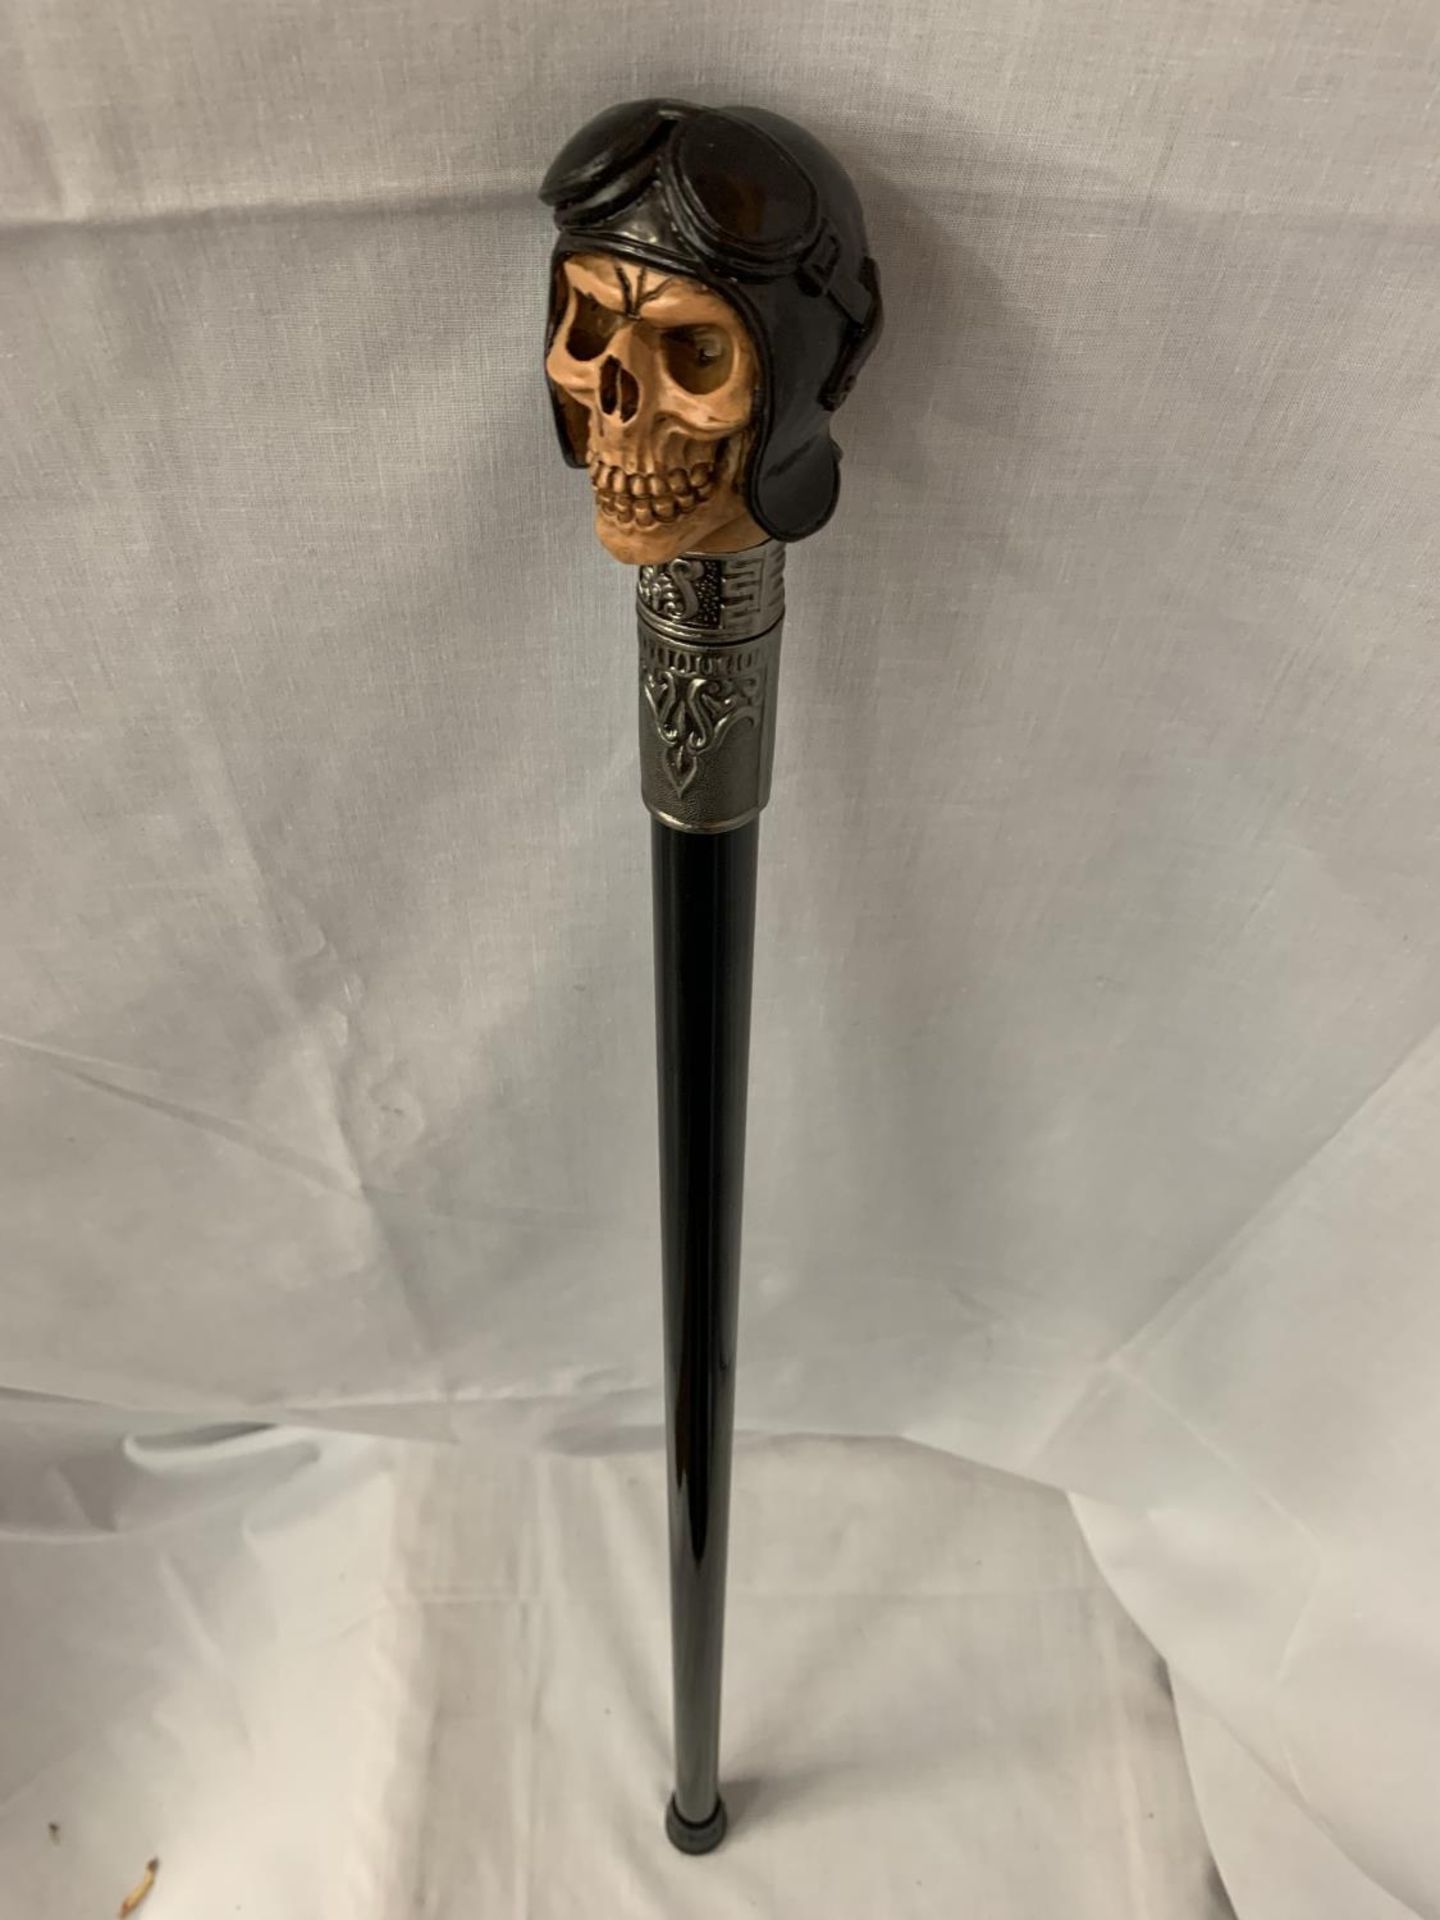 A WALKING STICK WITH A STEAMPUNK STYLE SKULL HEAD HANDLE - Image 2 of 3